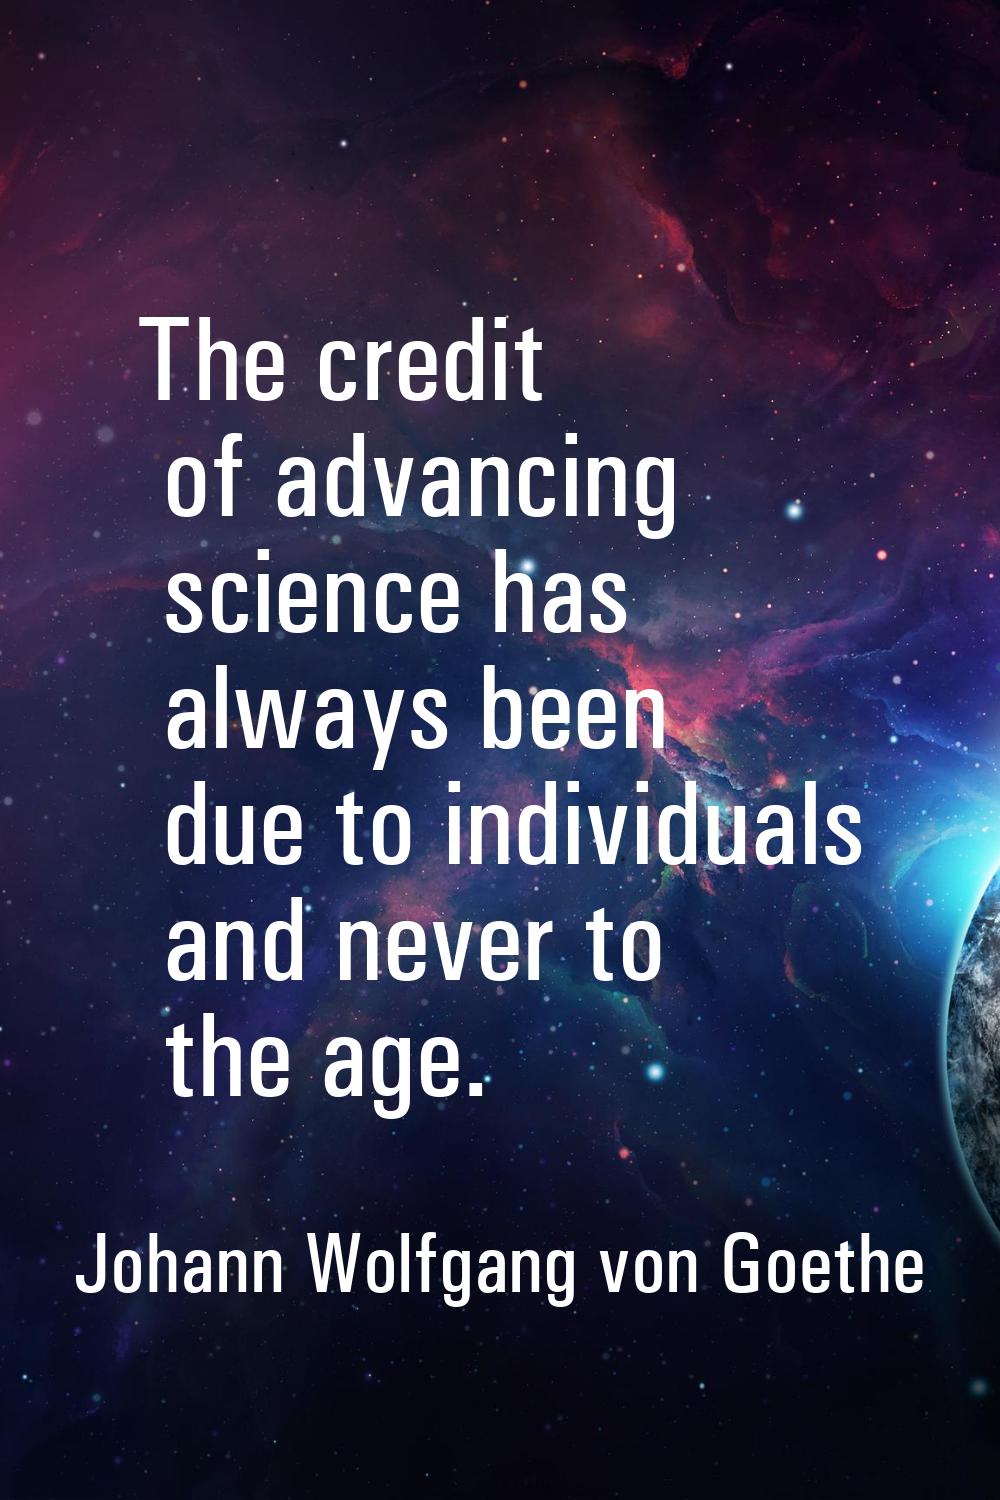 The credit of advancing science has always been due to individuals and never to the age.